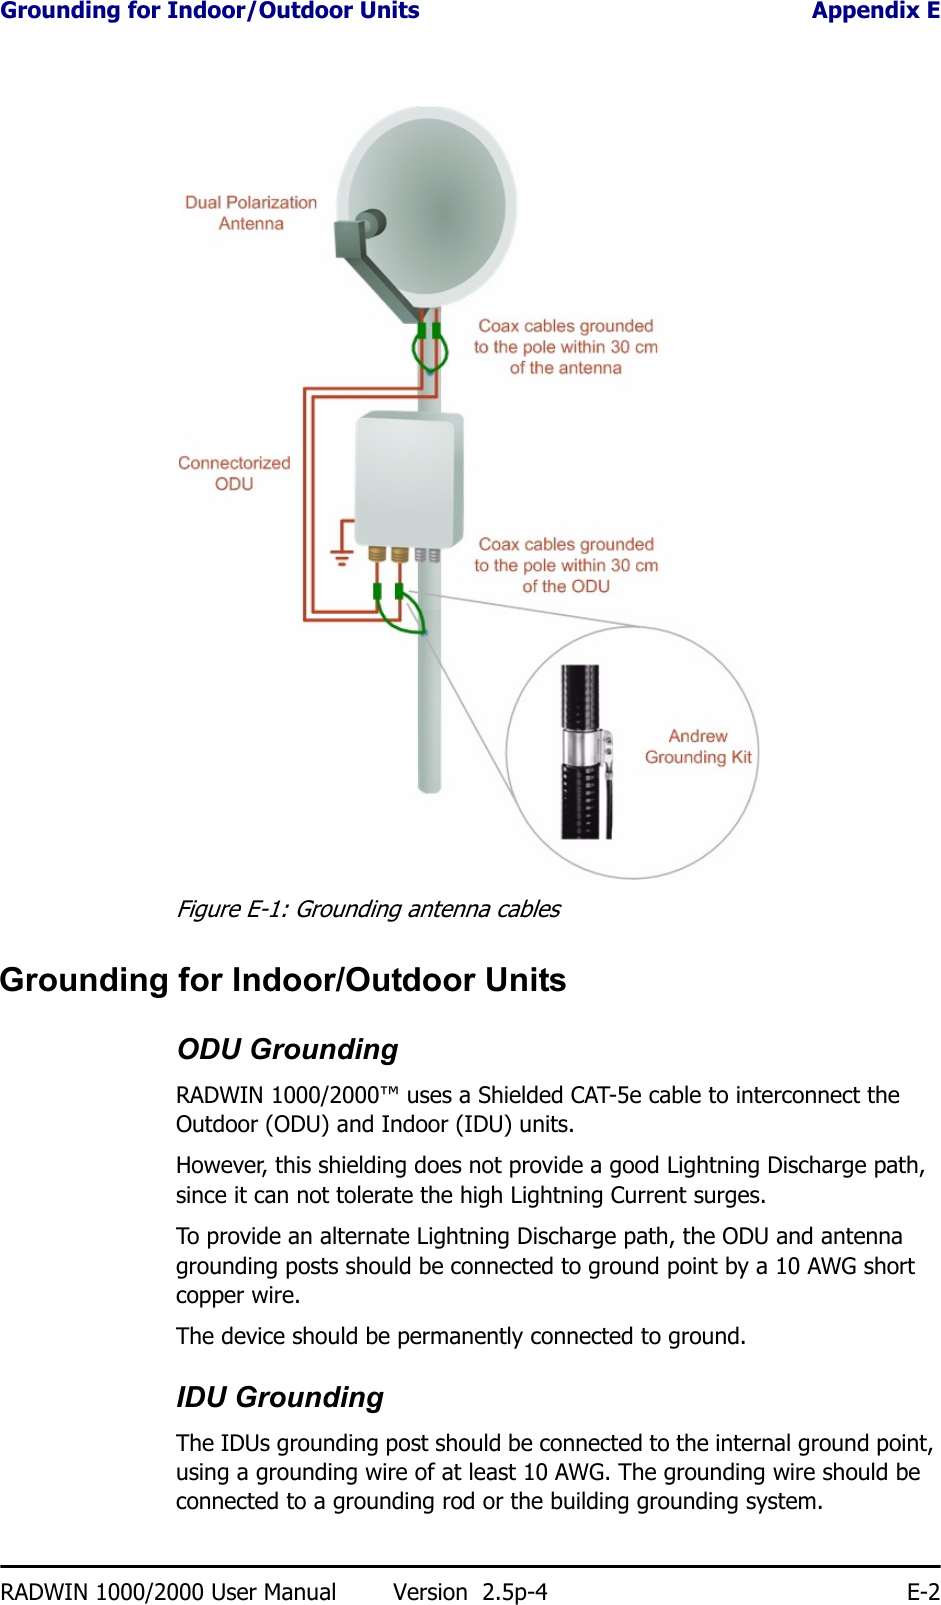 Grounding for Indoor/Outdoor Units Appendix ERADWIN 1000/2000 User Manual Version  2.5p-4 E-2Figure E-1: Grounding antenna cablesGrounding for Indoor/Outdoor UnitsODU GroundingRADWIN 1000/2000™ uses a Shielded CAT-5e cable to interconnect the Outdoor (ODU) and Indoor (IDU) units. However, this shielding does not provide a good Lightning Discharge path, since it can not tolerate the high Lightning Current surges.To provide an alternate Lightning Discharge path, the ODU and antenna grounding posts should be connected to ground point by a 10 AWG short copper wire.The device should be permanently connected to ground.IDU GroundingThe IDUs grounding post should be connected to the internal ground point, using a grounding wire of at least 10 AWG. The grounding wire should be connected to a grounding rod or the building grounding system.